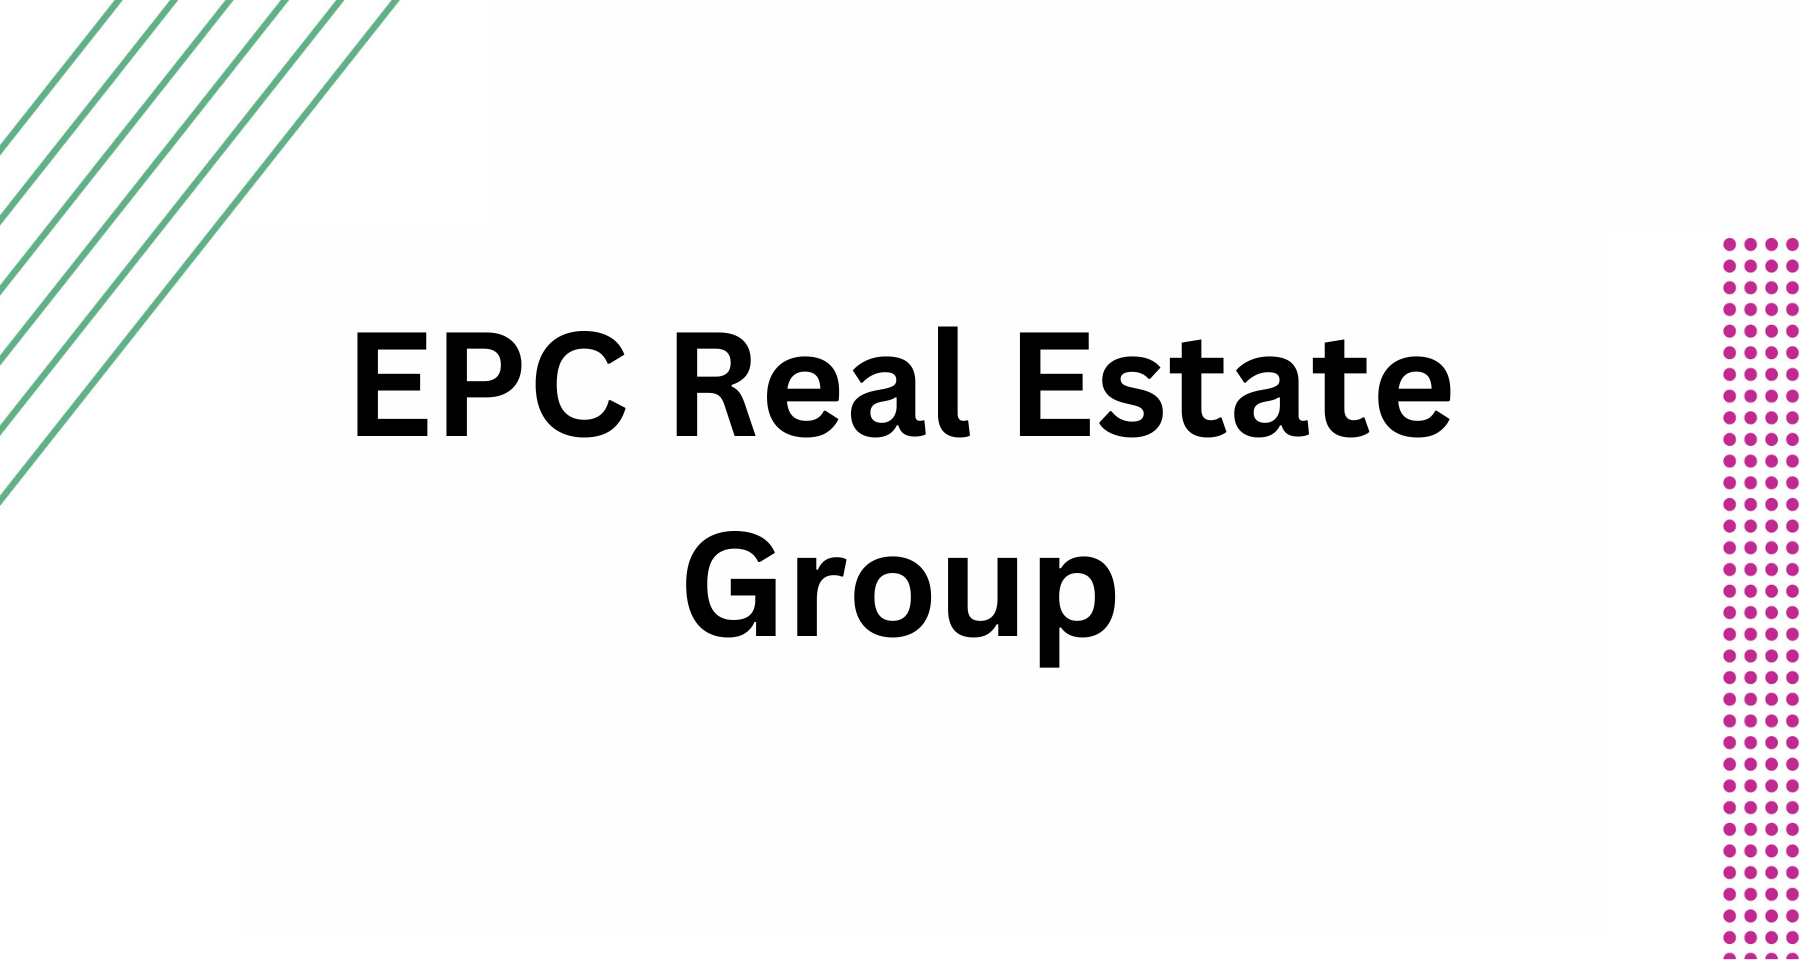 EPC Real Estate Group